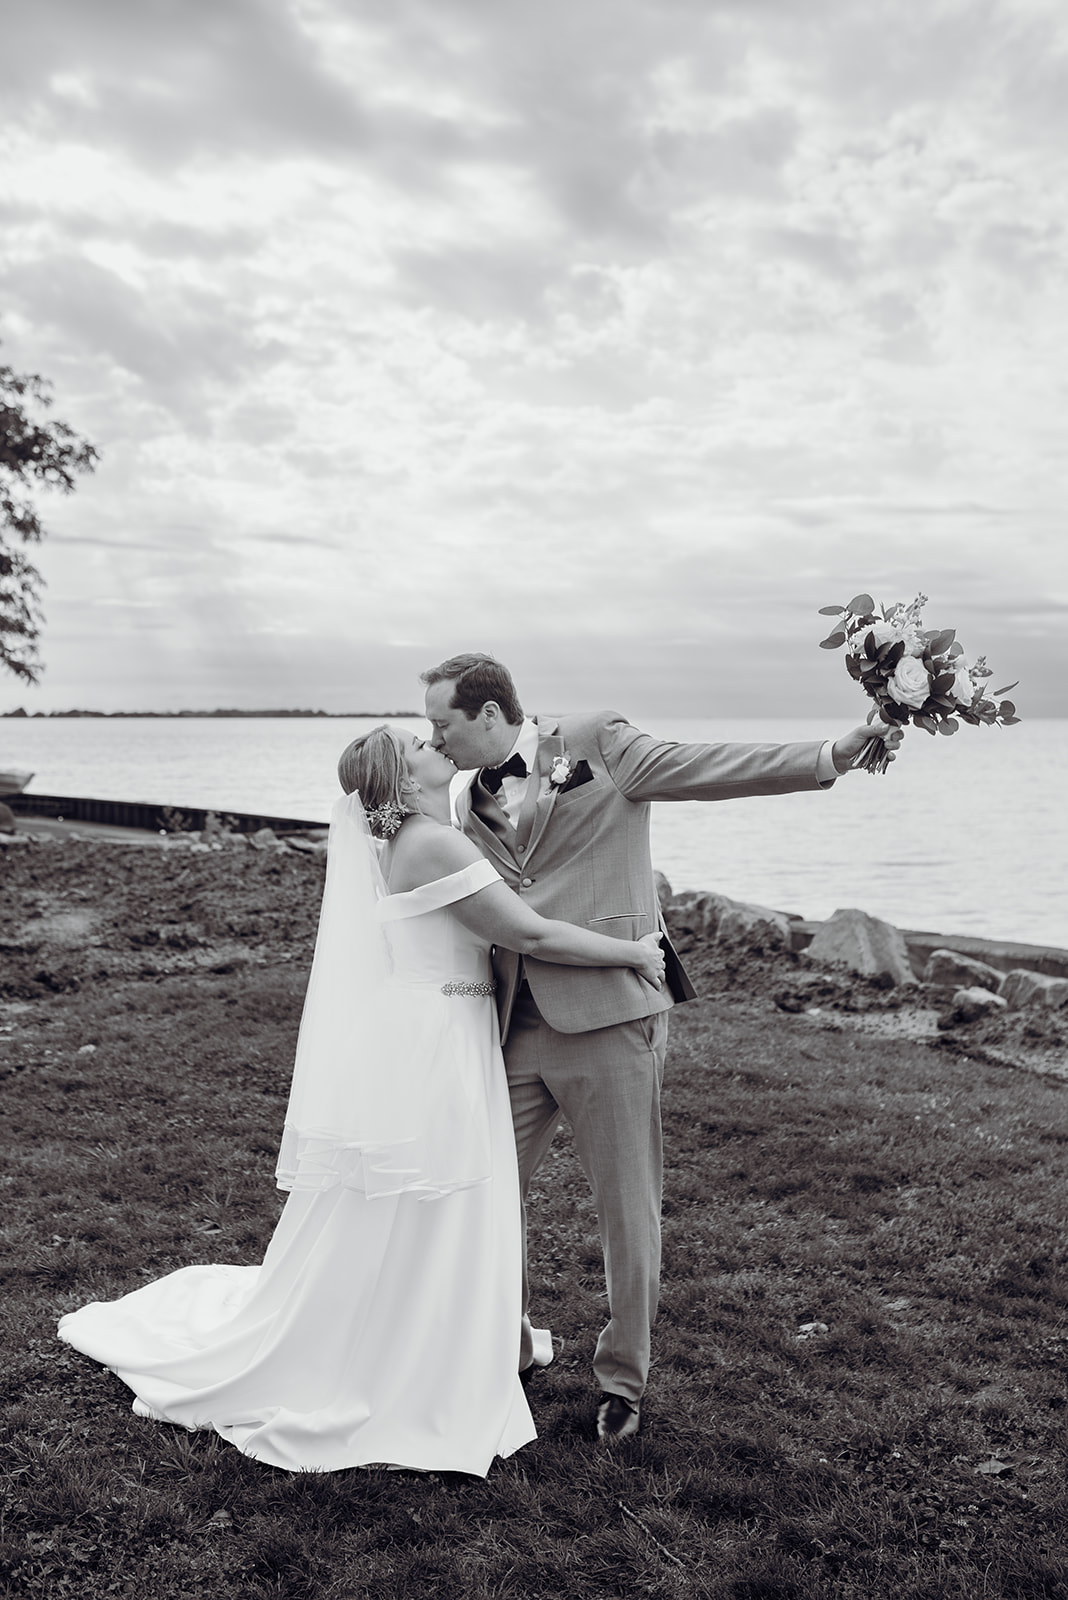 A couple's intimate private property wedding in Windsor Essex County